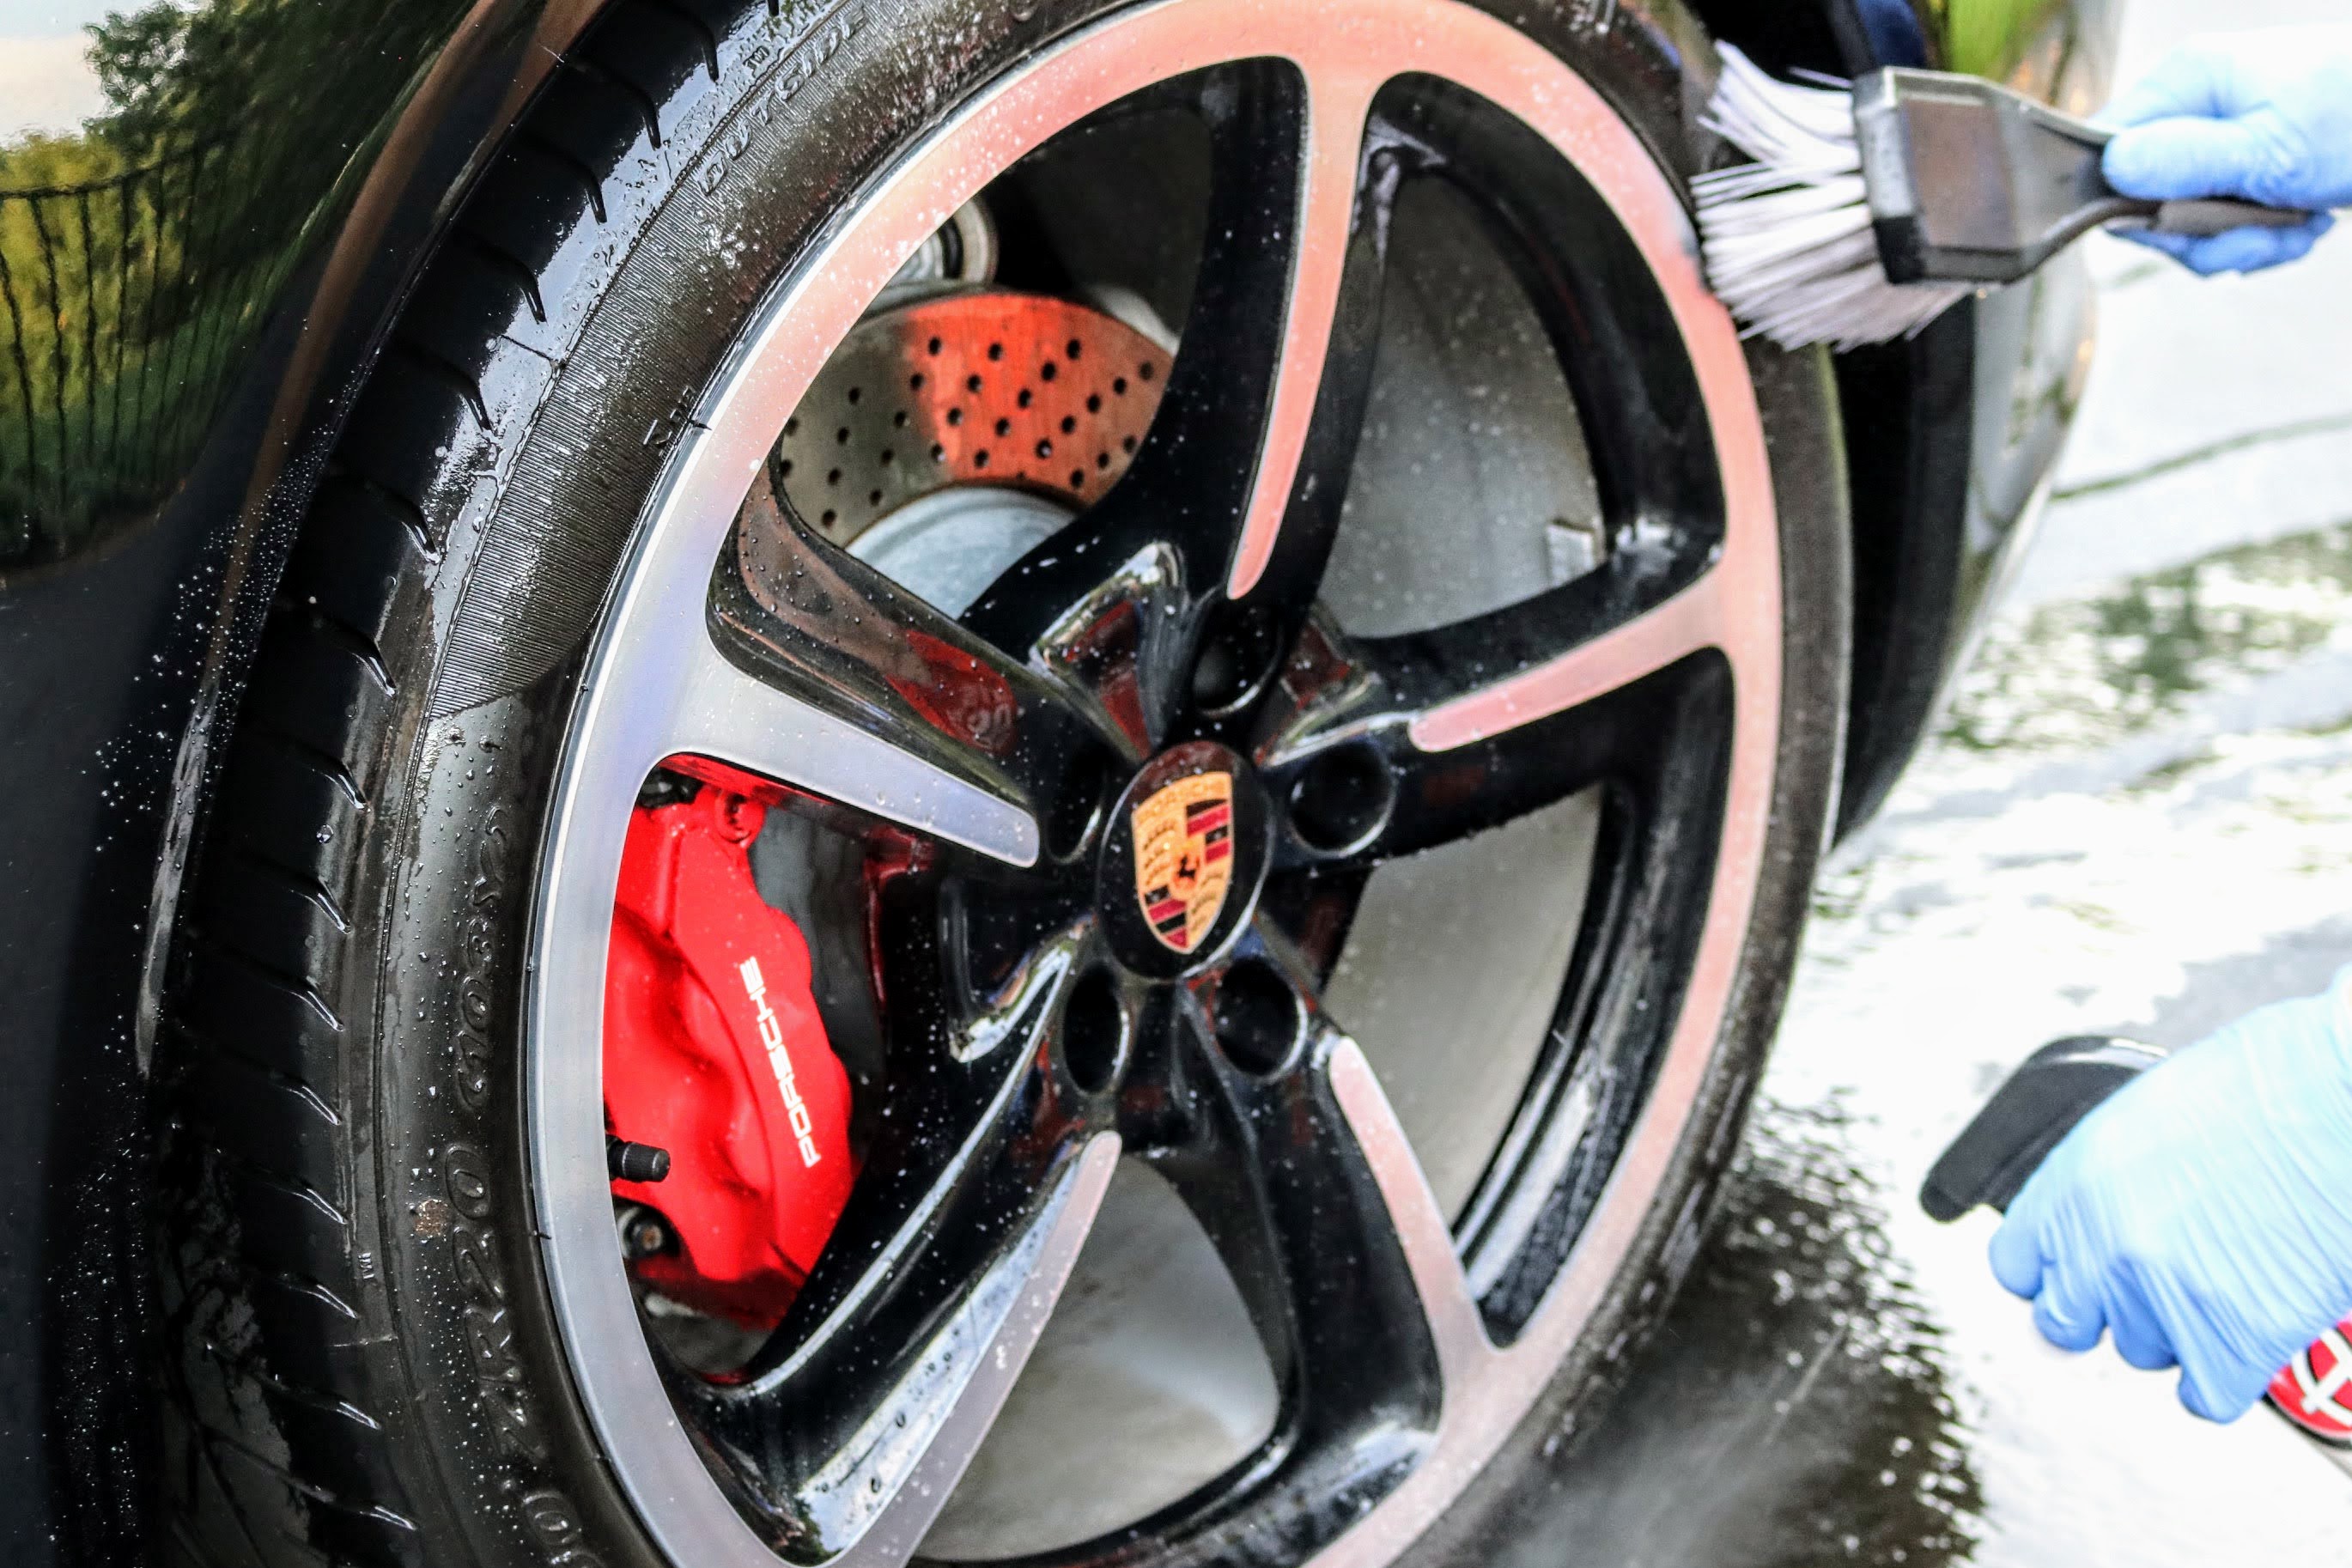 Using a tire brush and Adam's Polishes Tire and Rubber Cleaner to clean Porsche 911 (991.1) tires